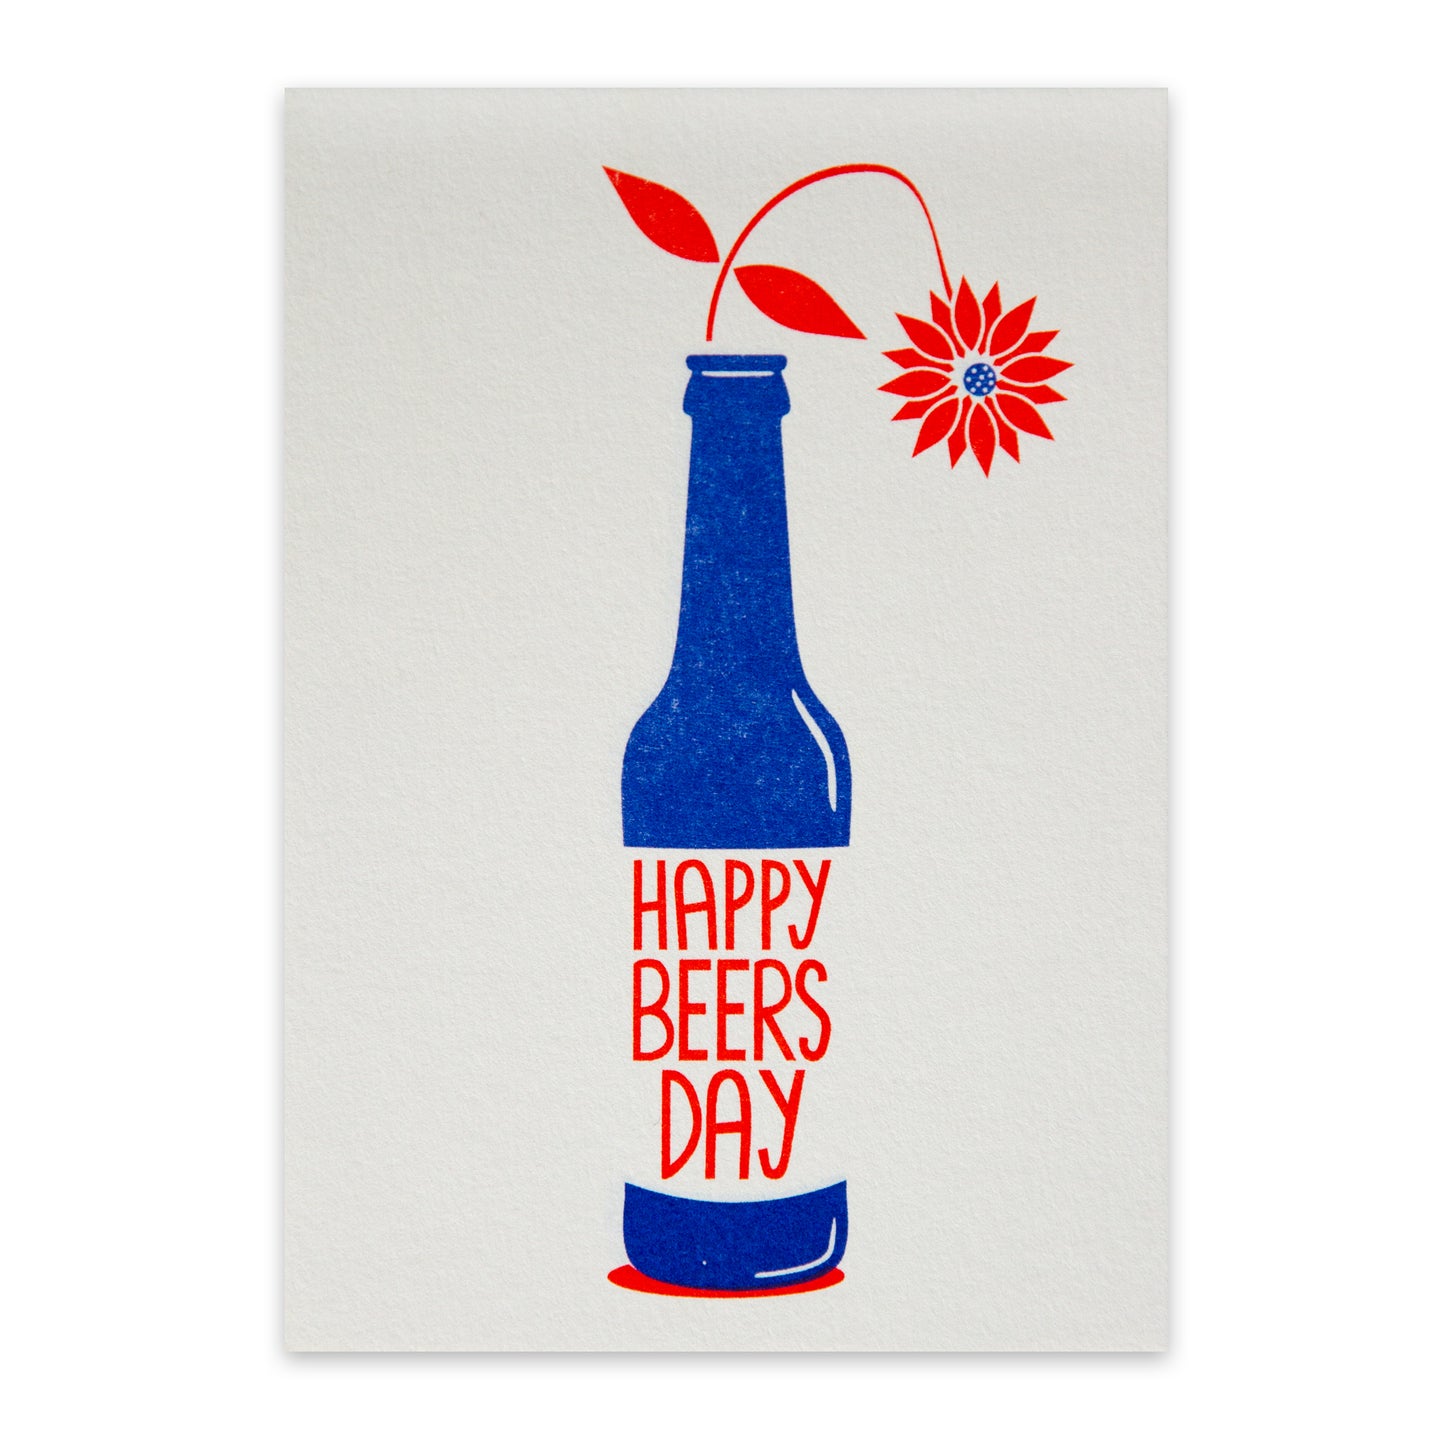 Postkarte Vatertag Happy Beersday DIN A6 - Risographie